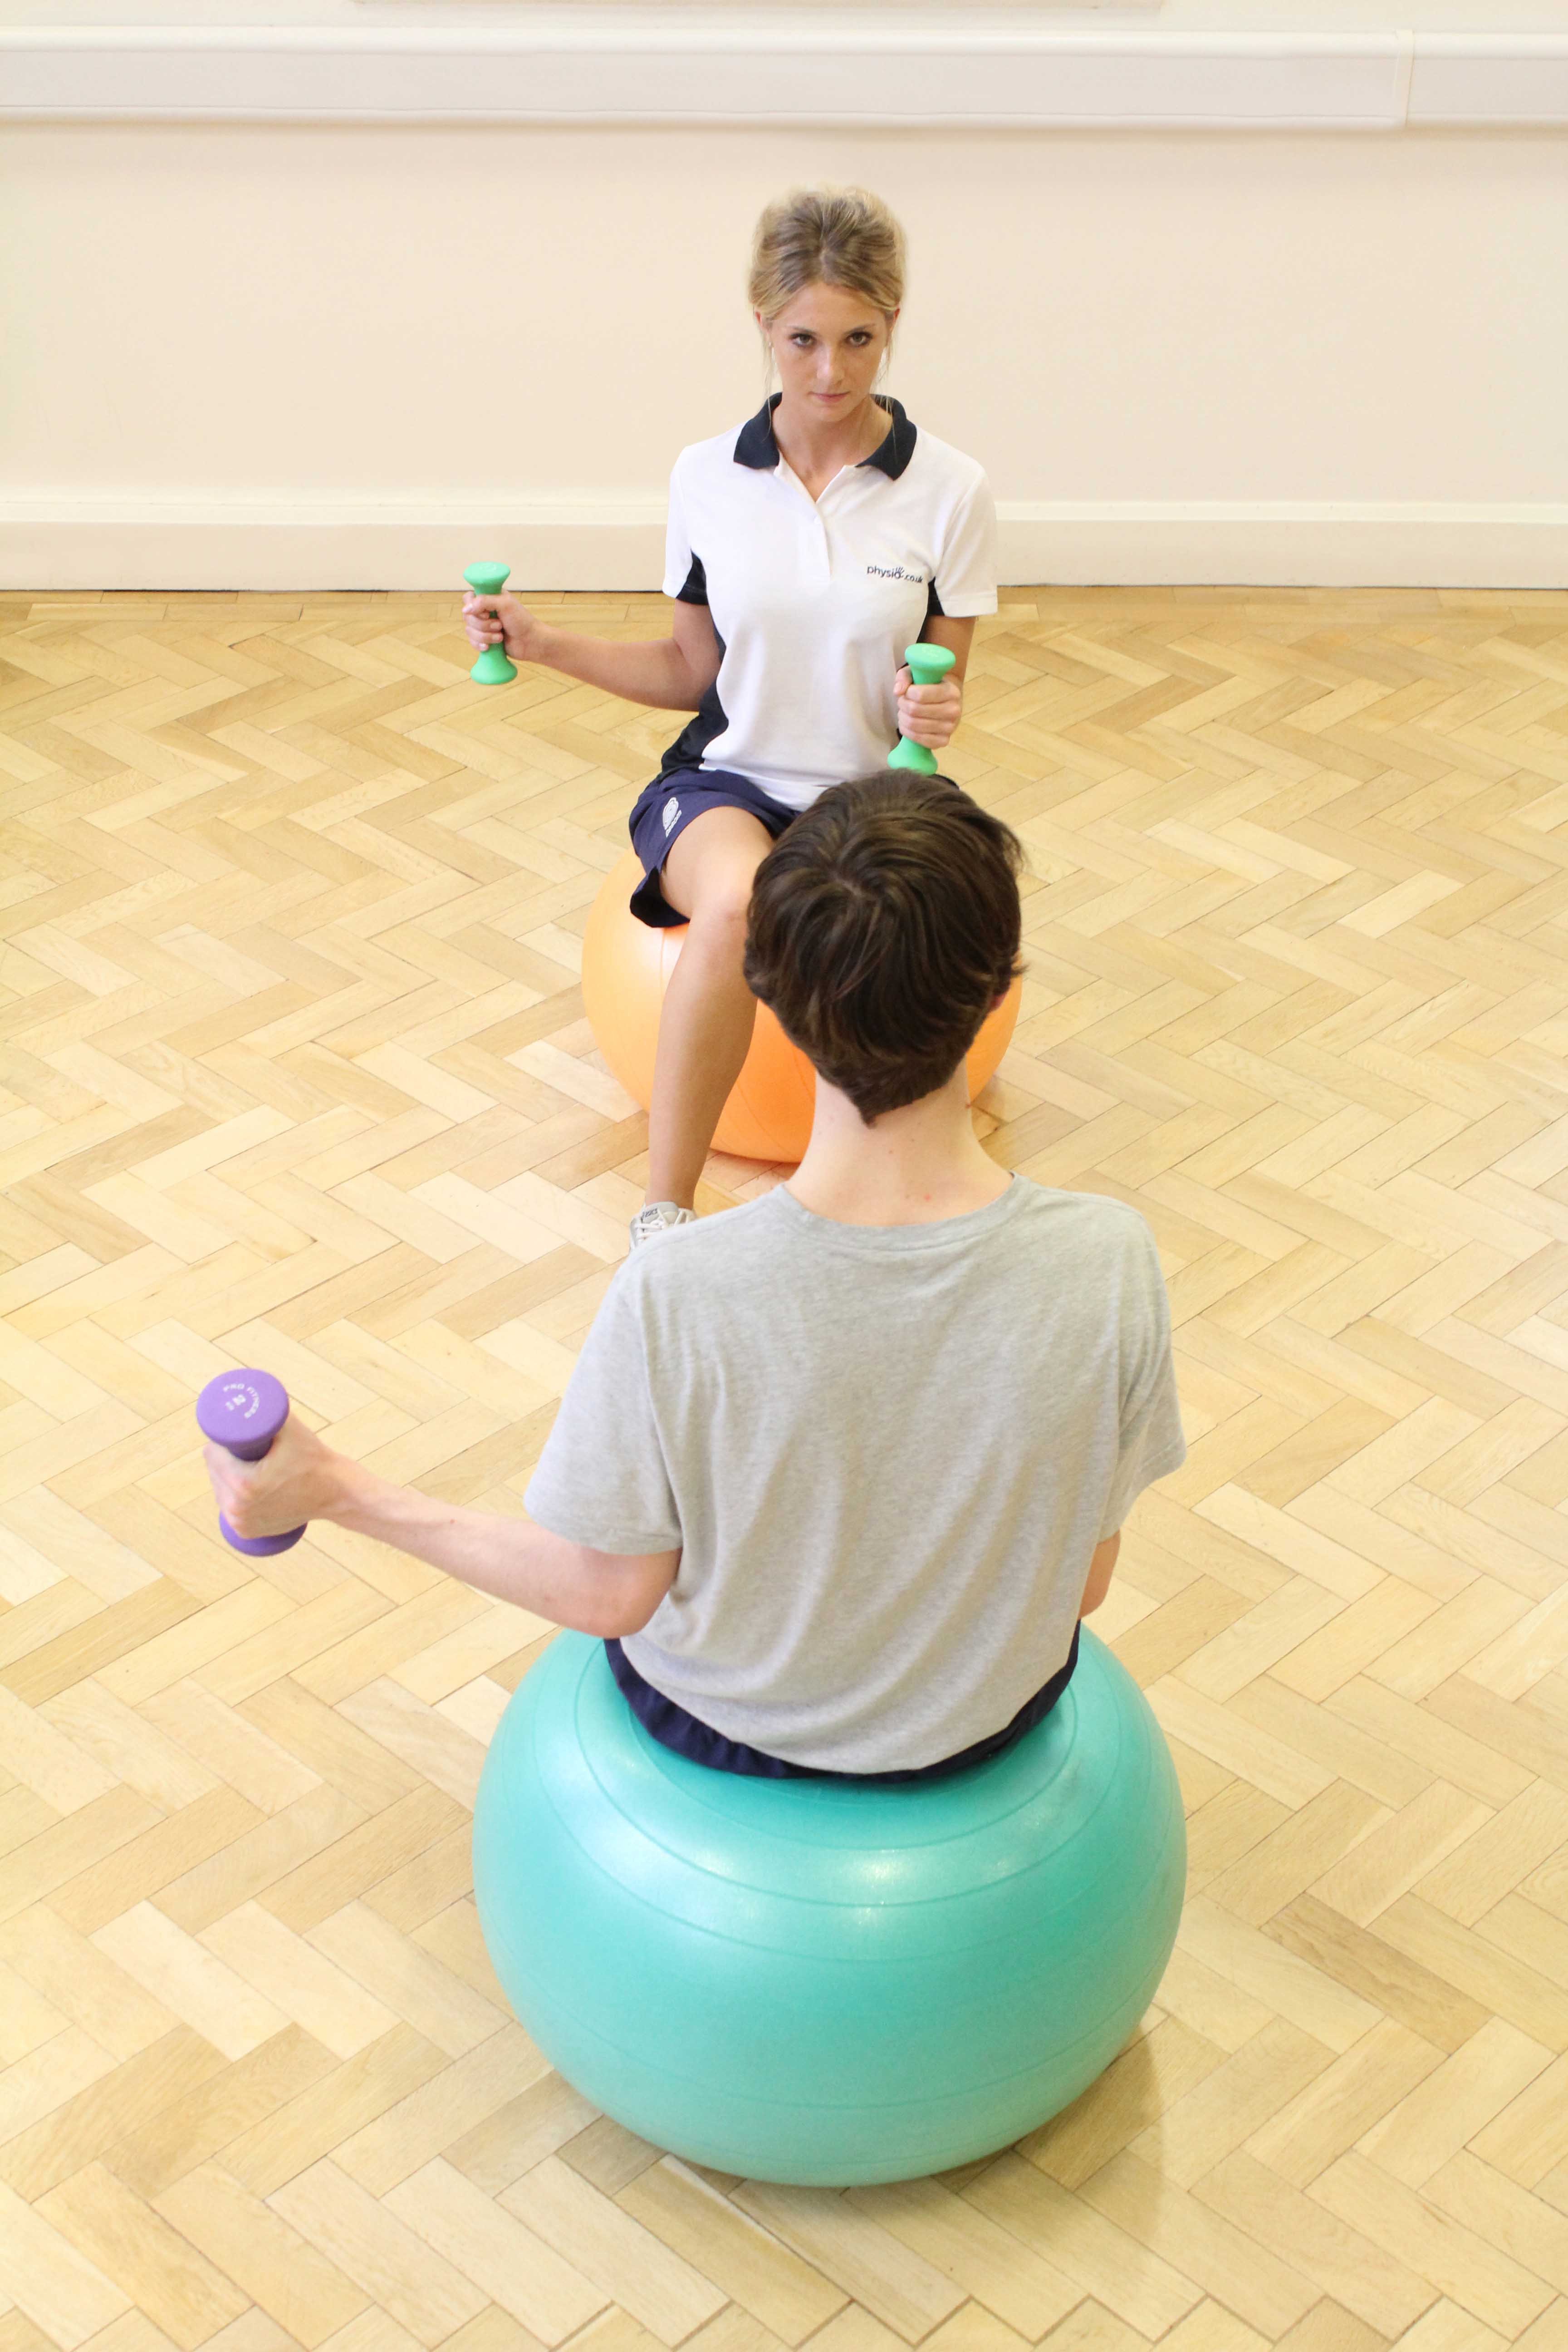 Mobilisation exercises for the knee joint